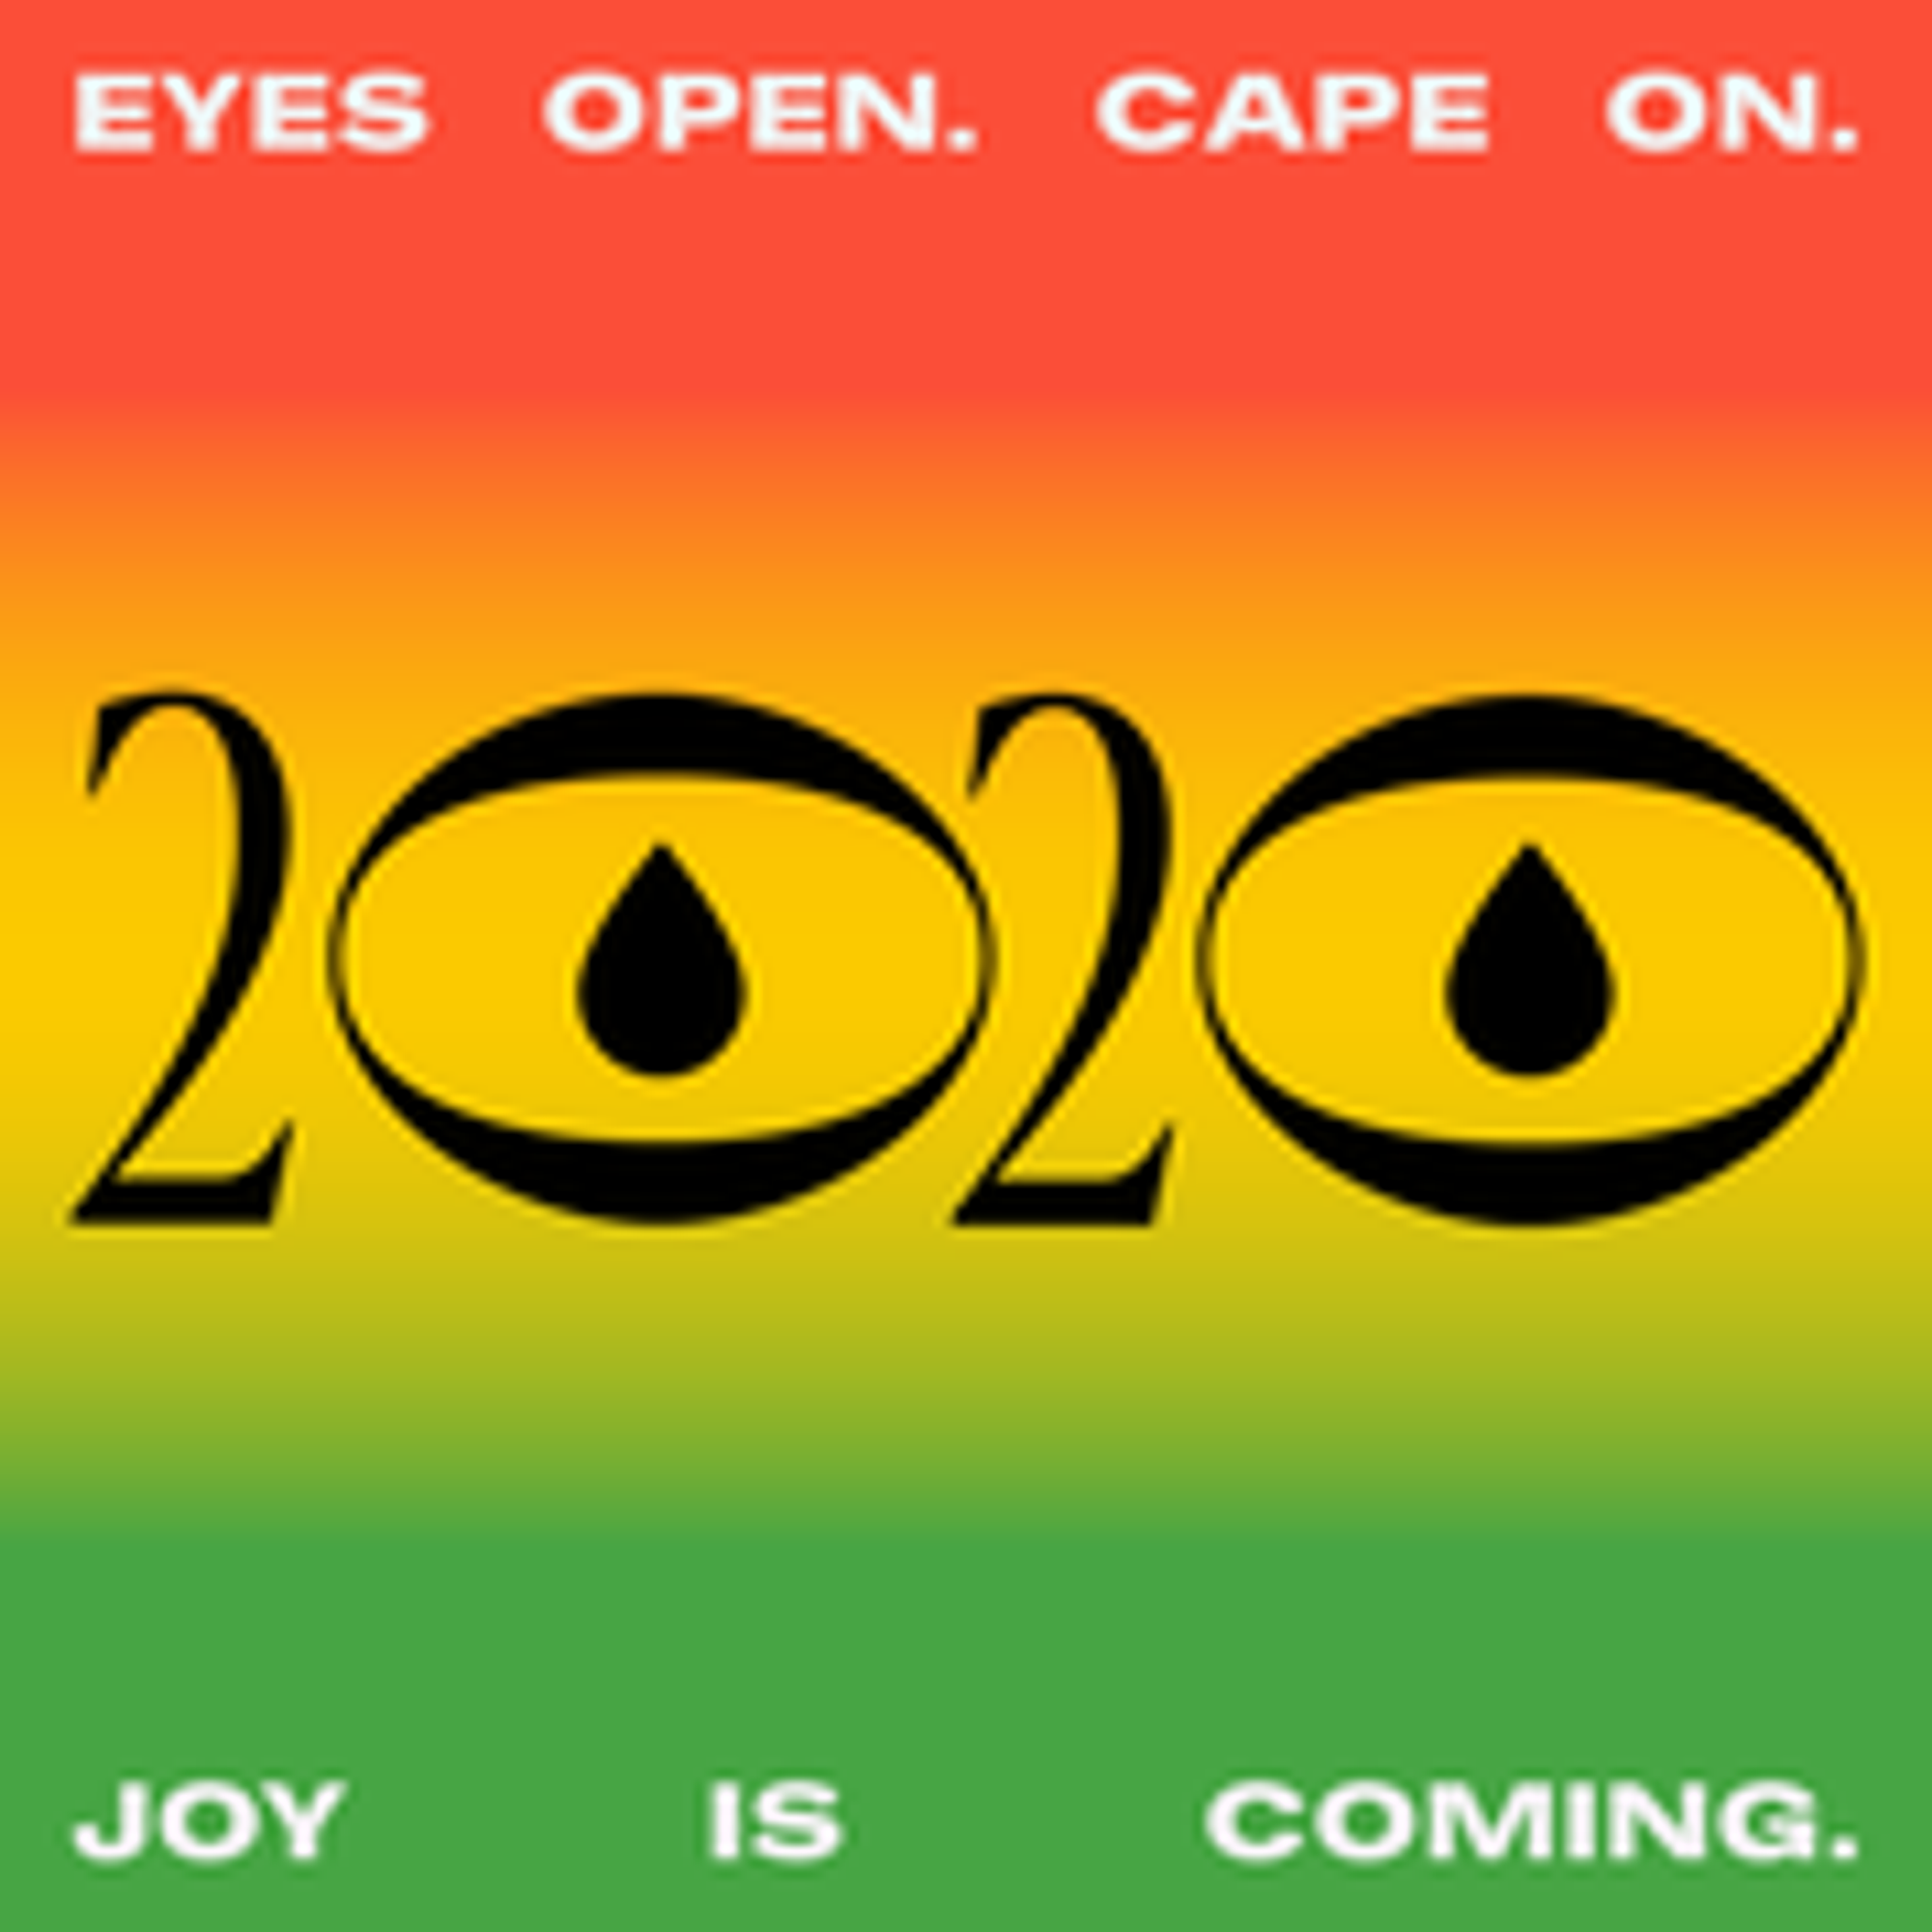 graphic poster of eyes with text saying "Eyes open. Cape on. 2020. Joy is coming."